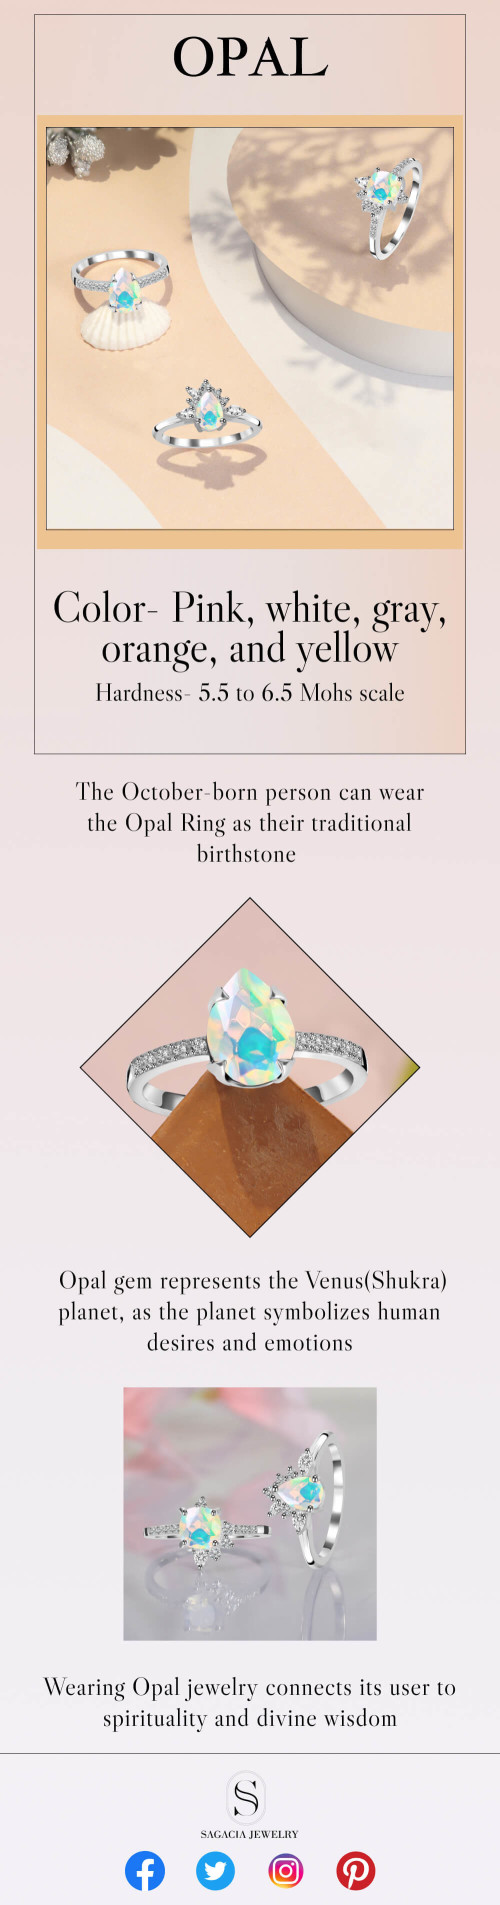 Color- Pink, white, gray, orange, and yellow

Hardness- 5.5 to 6.5 Mohs scale

The October-born person can wear the Opal Ring as their traditional birthstone.

The Opal gem represents the Venus(Shukra) planet, as the planet symbolizes human desires and emotions.

Wearing Opal jewelry connects its user to spirituality and divine wisdom

Visit@https://www.sagaciajewelry.com/gemstone/opal-jewelry